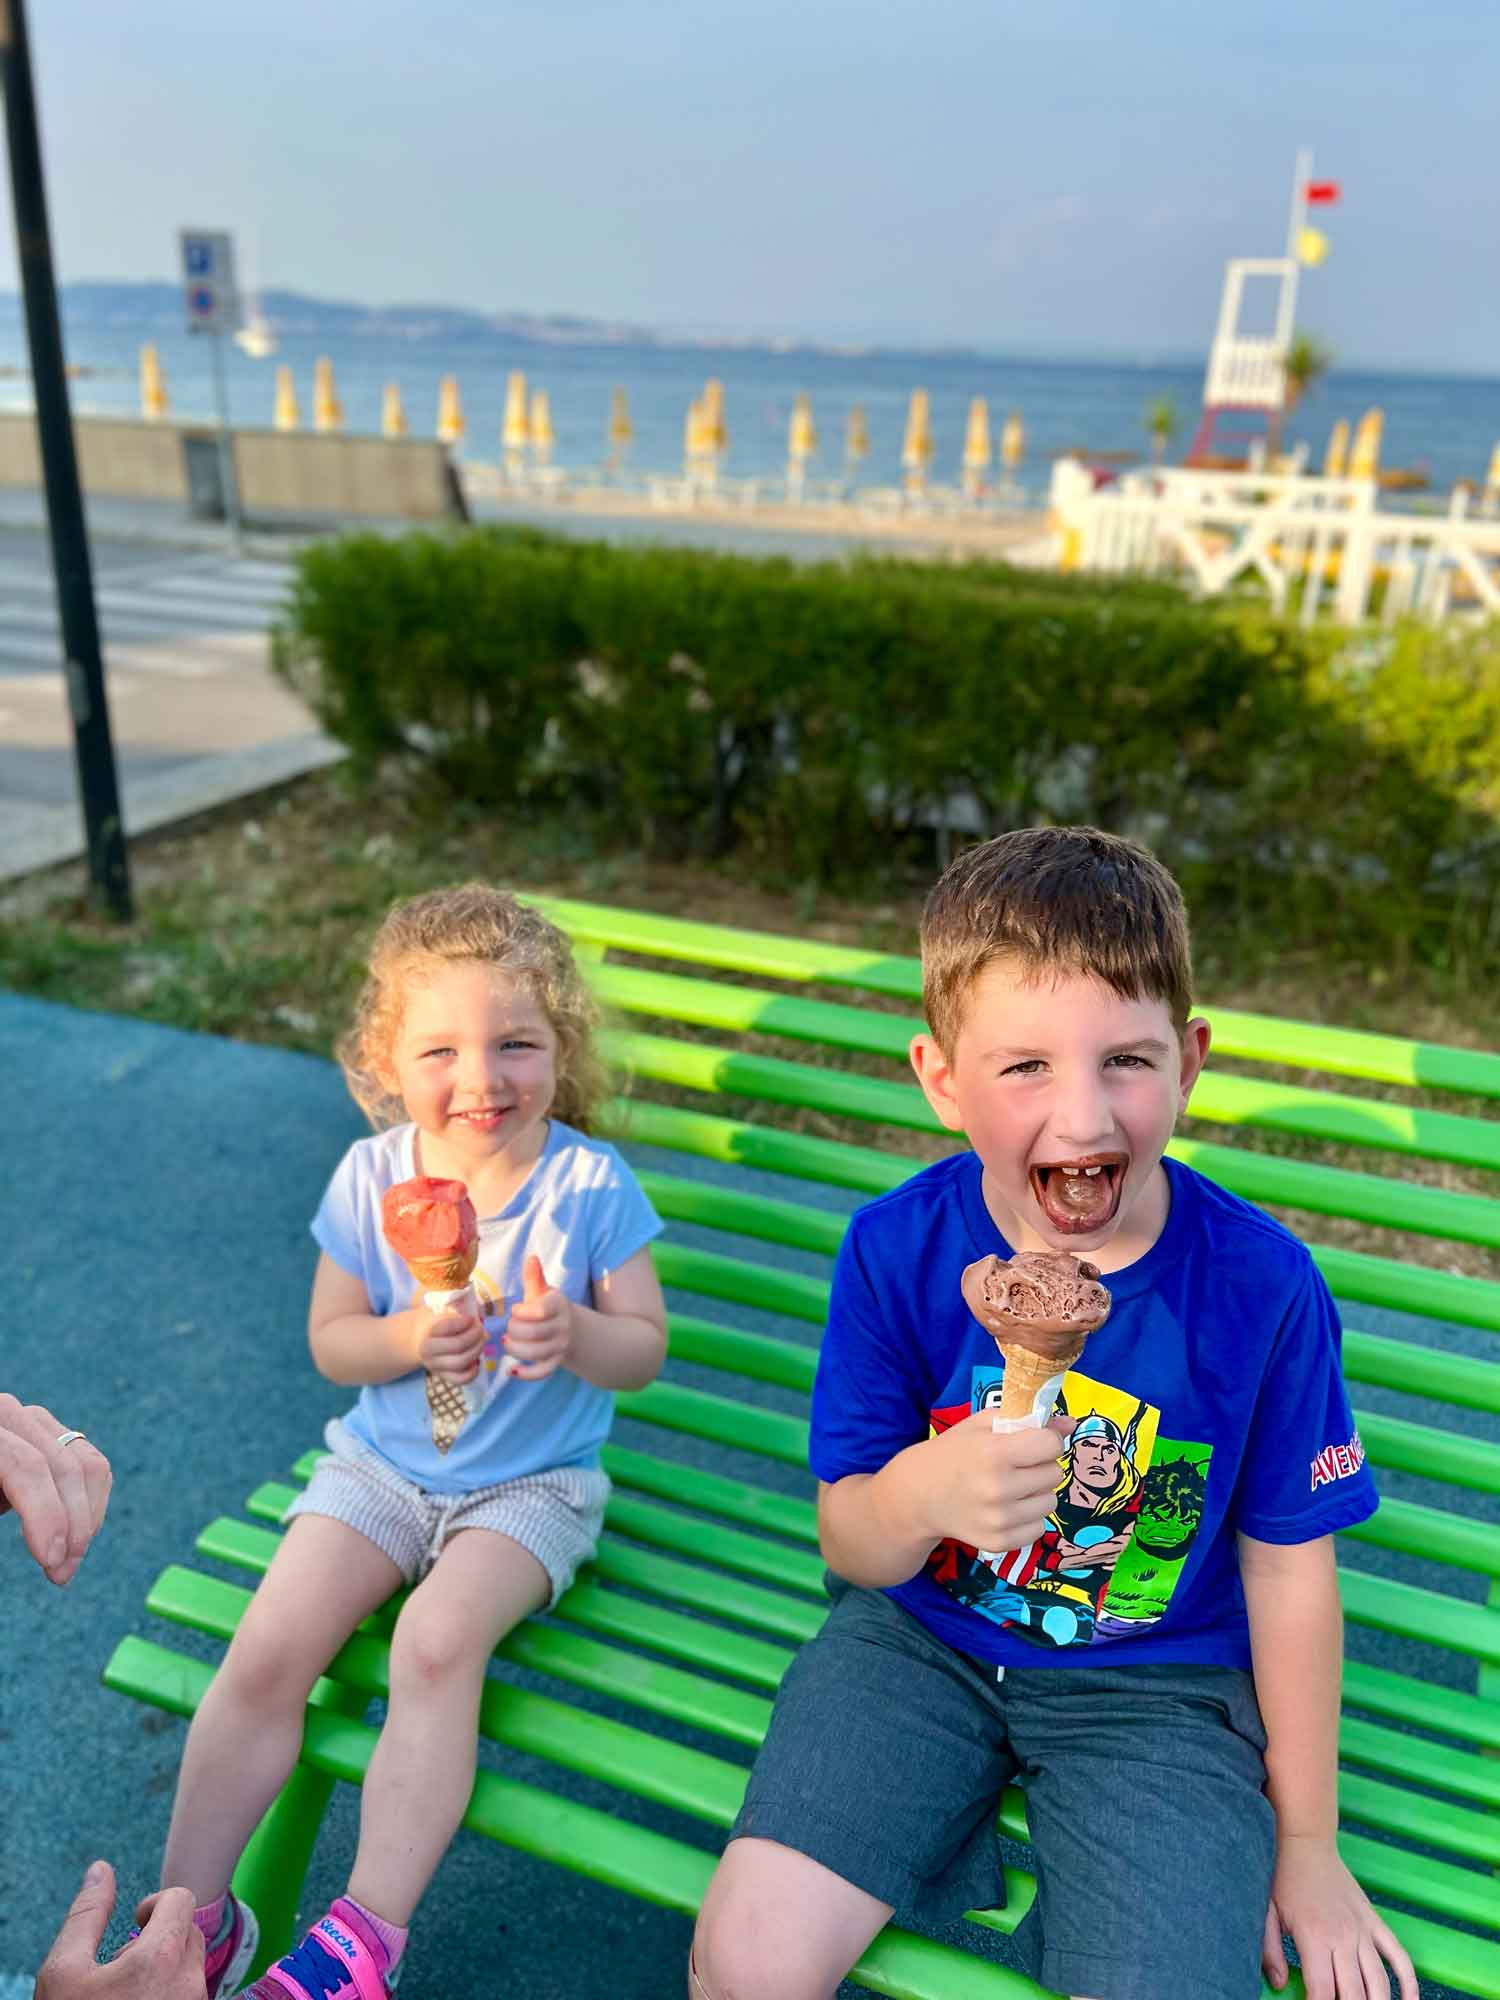 two kids on a bench with ice cream ocnes